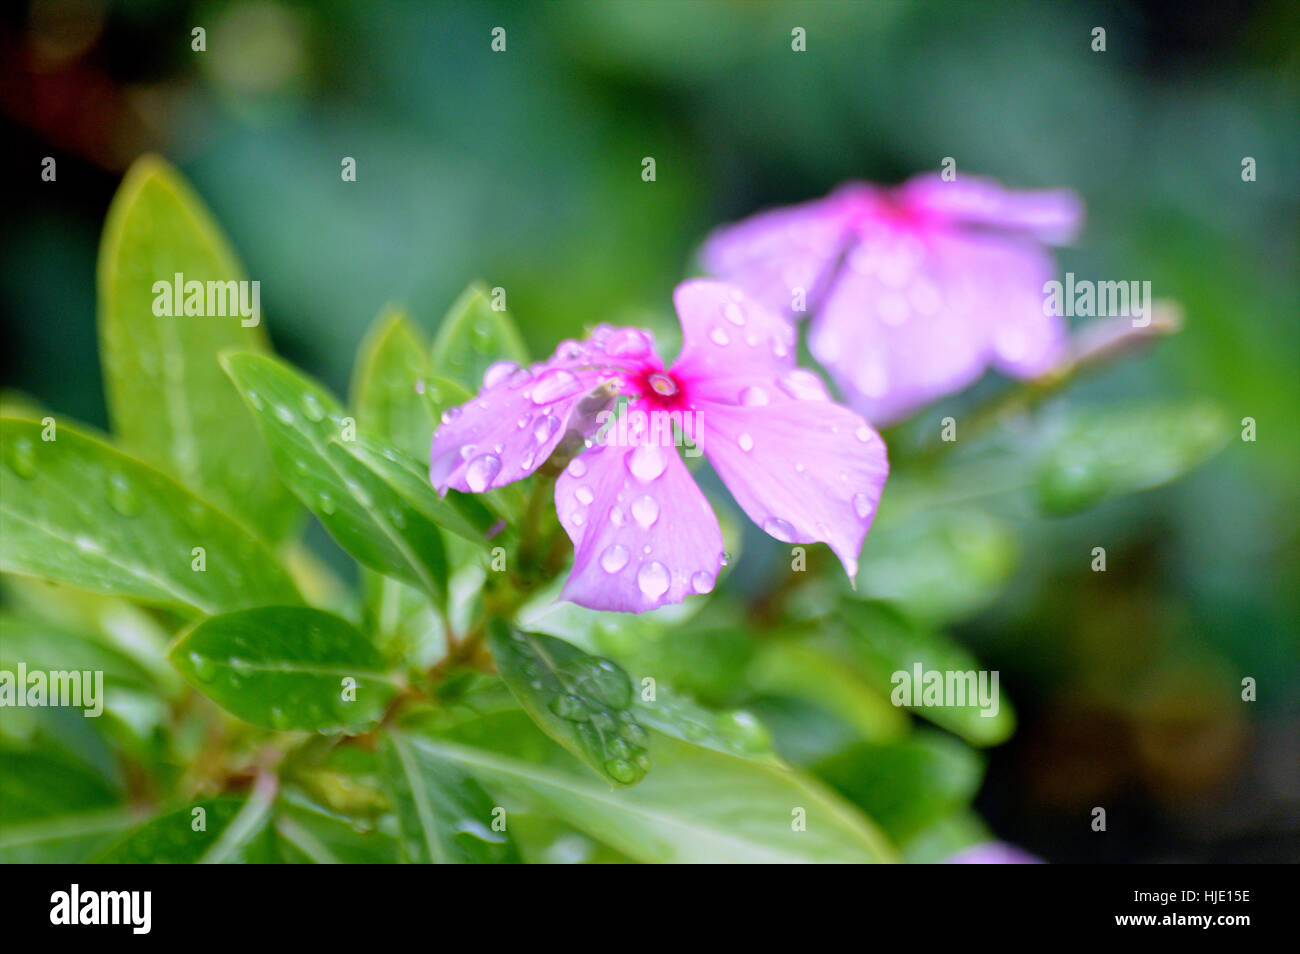 Two open pink and red impatiens water droplets Stock Photo